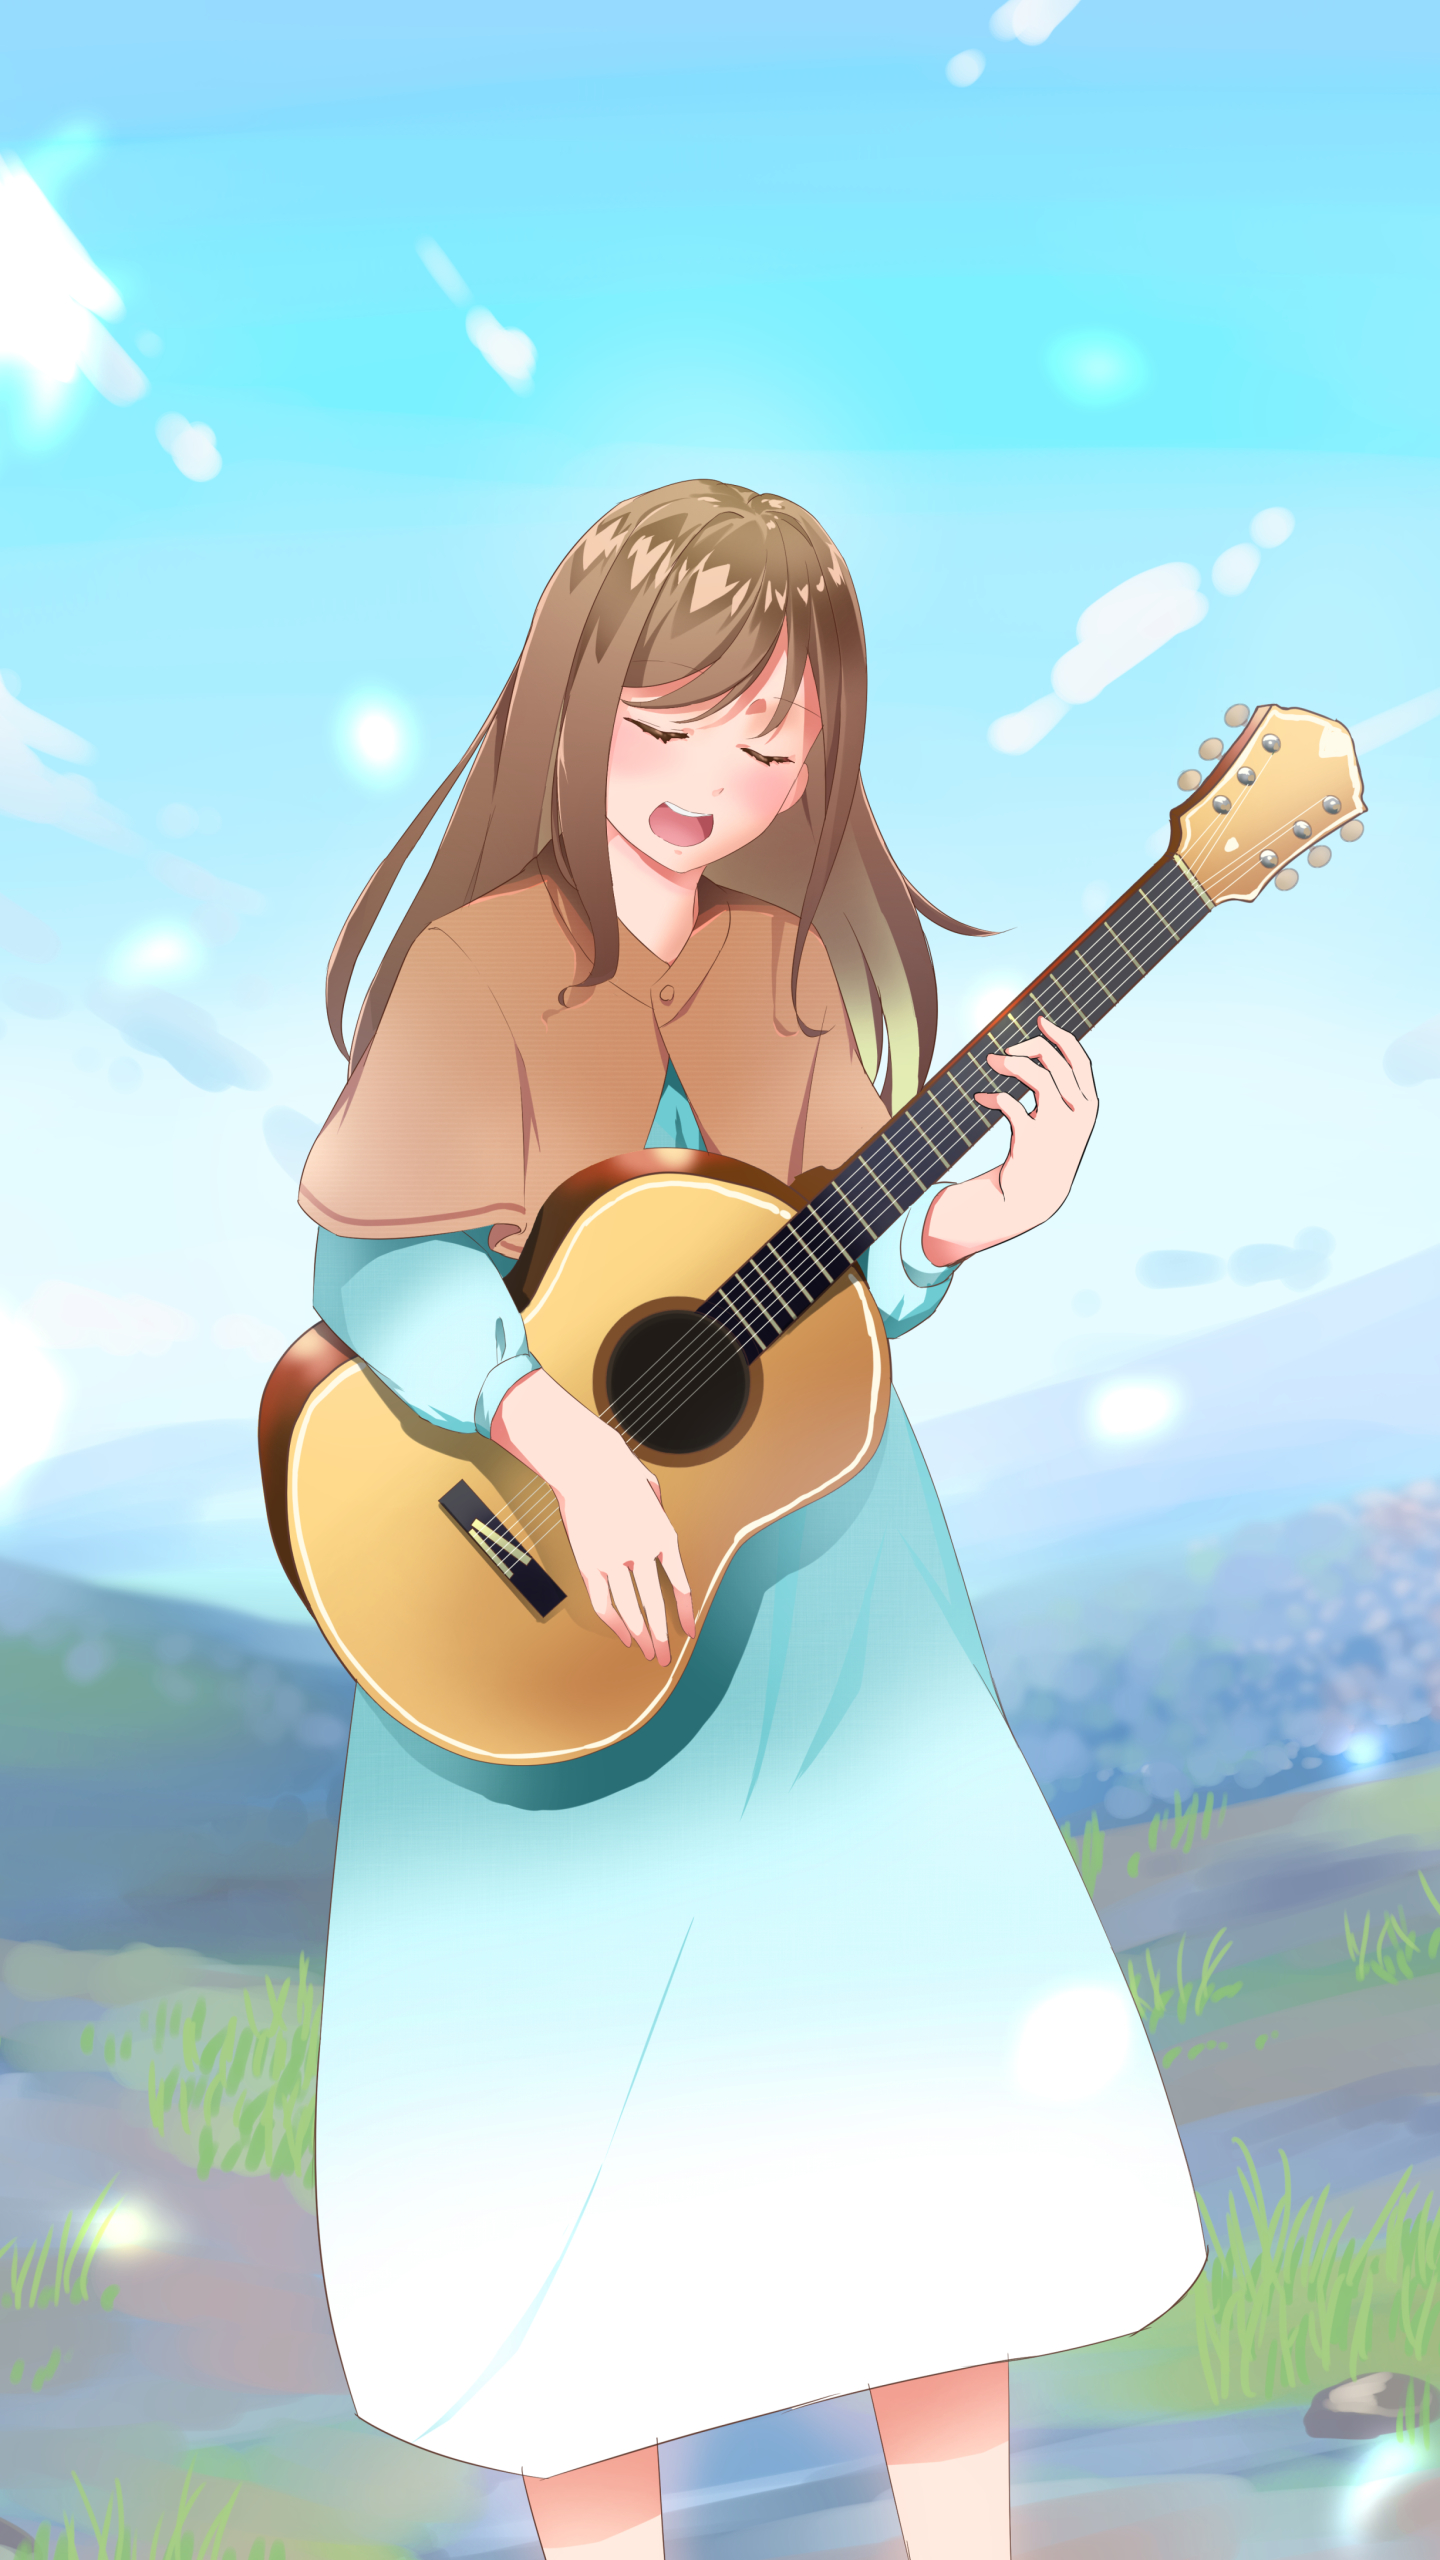 Download Anime Girl With Guitar For Girls Wallpaper | Wallpapers.com